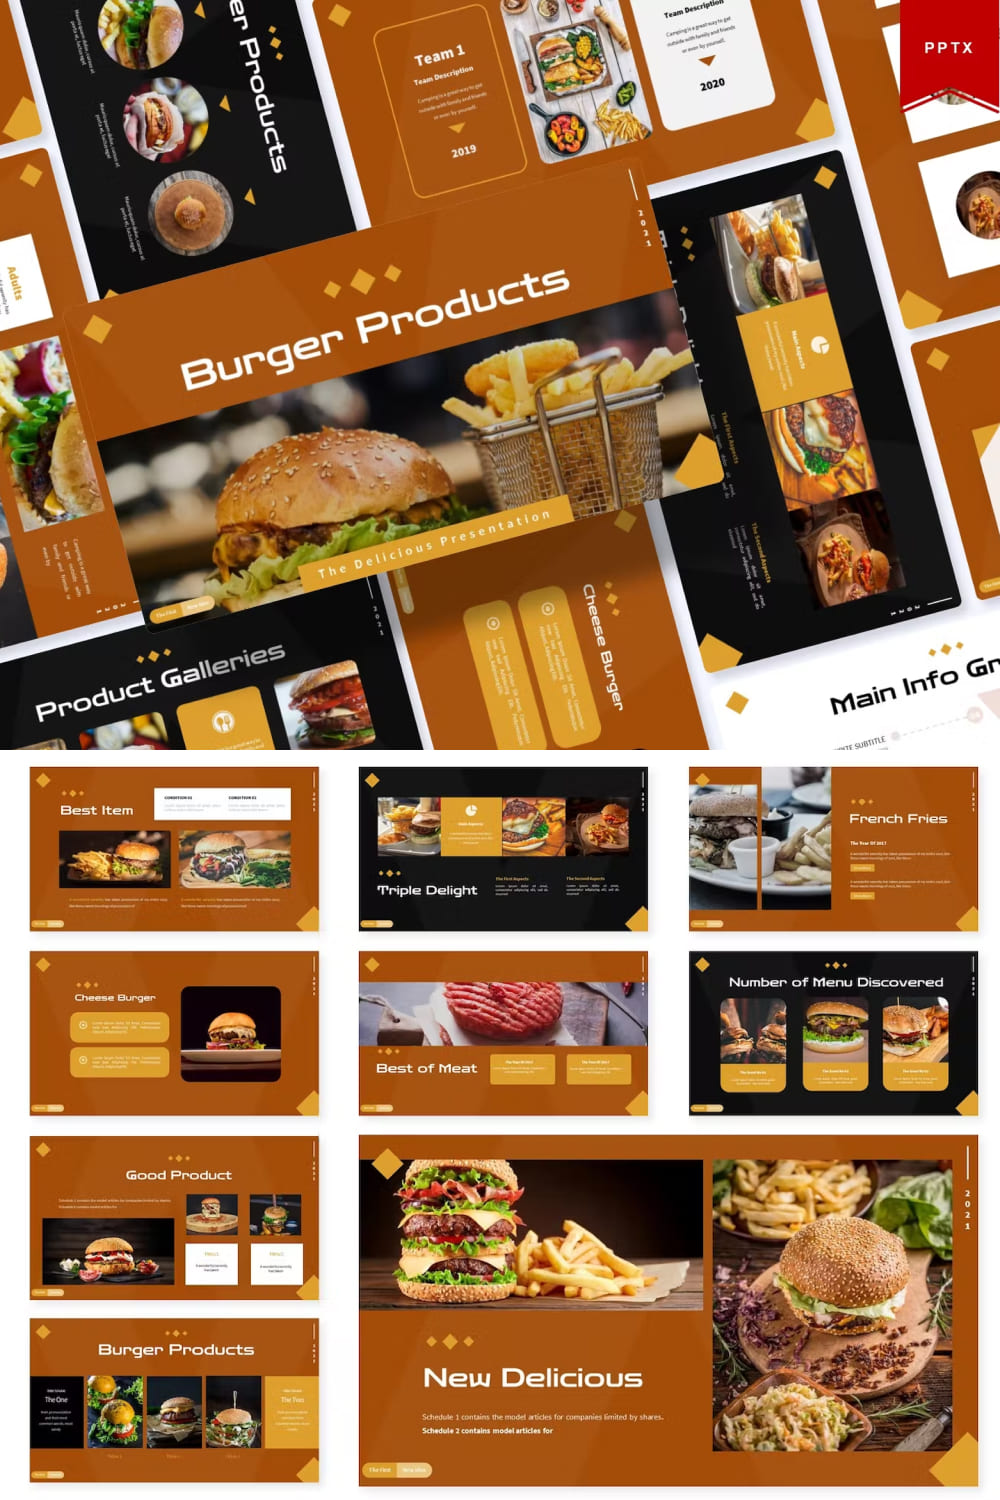 Burger Products | Powerpoint Template - Pinterest.